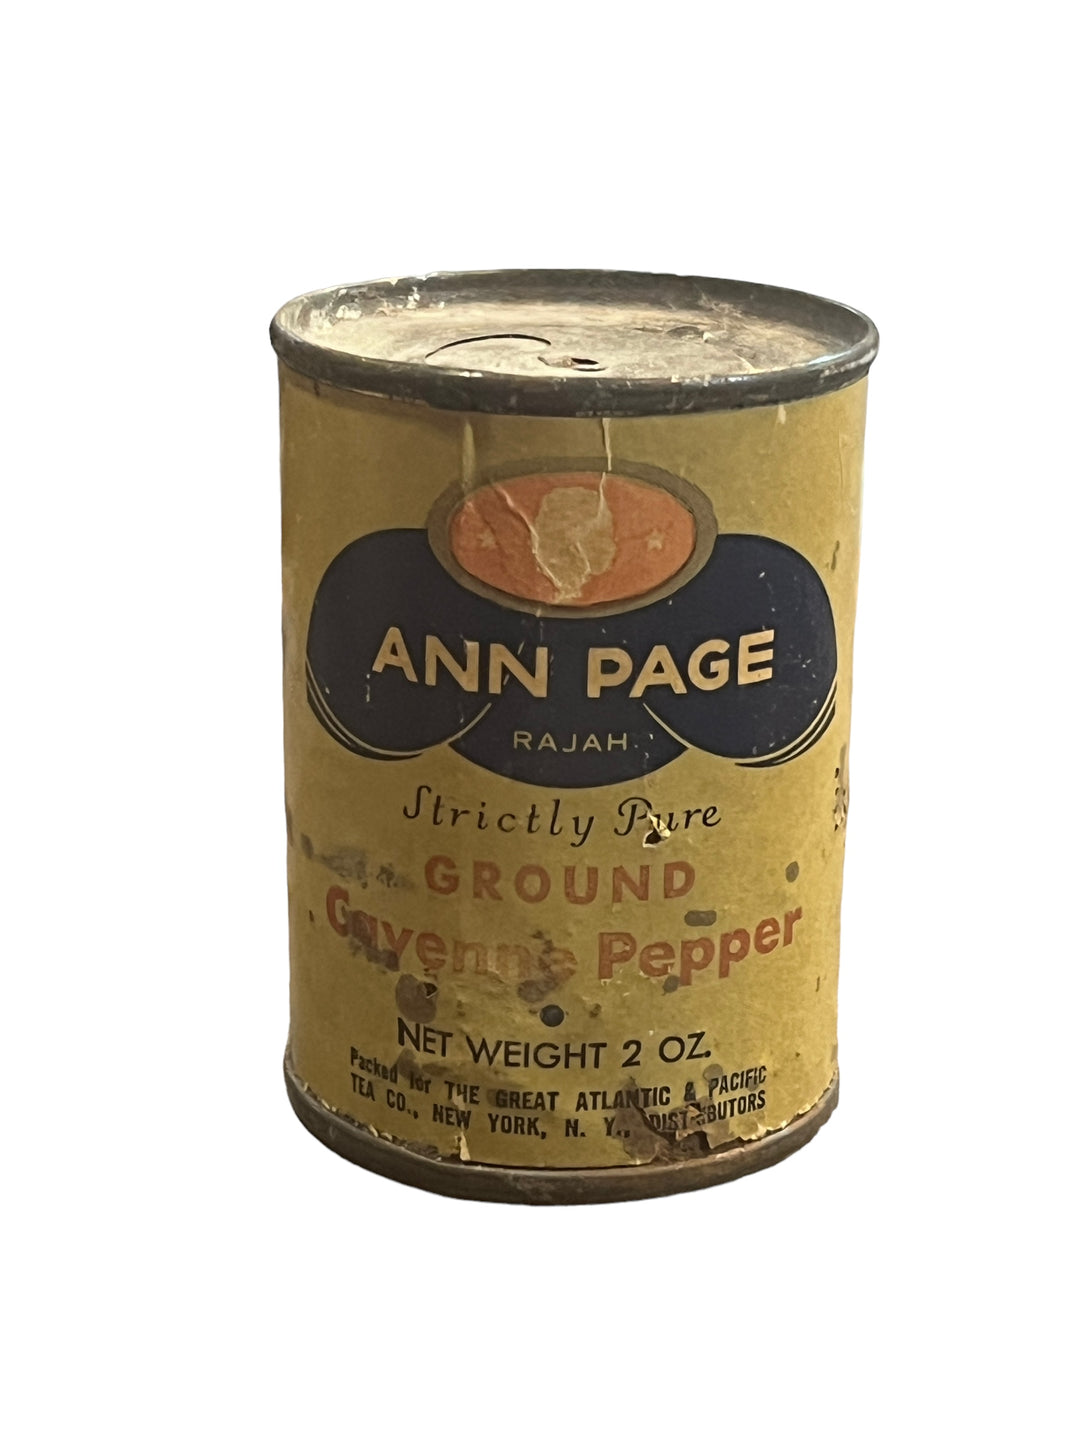 Spice Can - Ann Page Ground Cayene Pepper